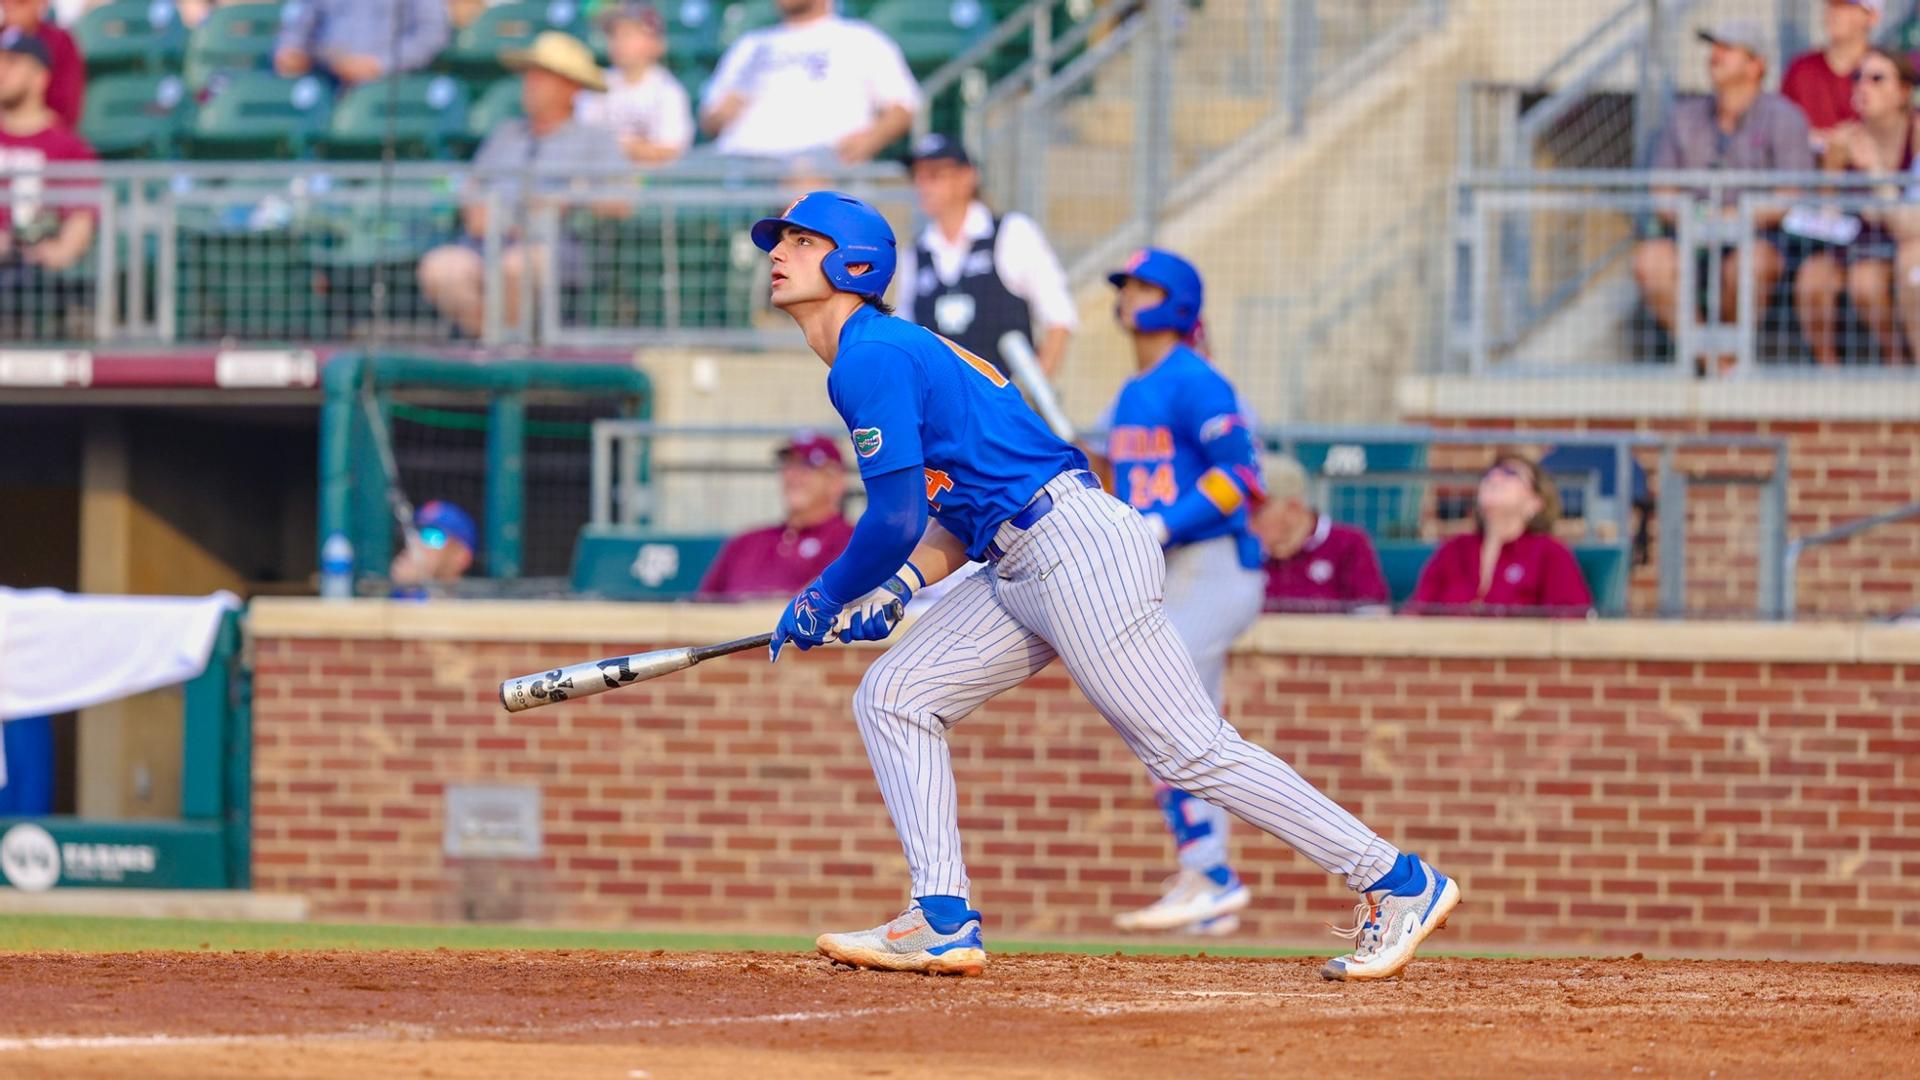 Gators continues blistering home run pace